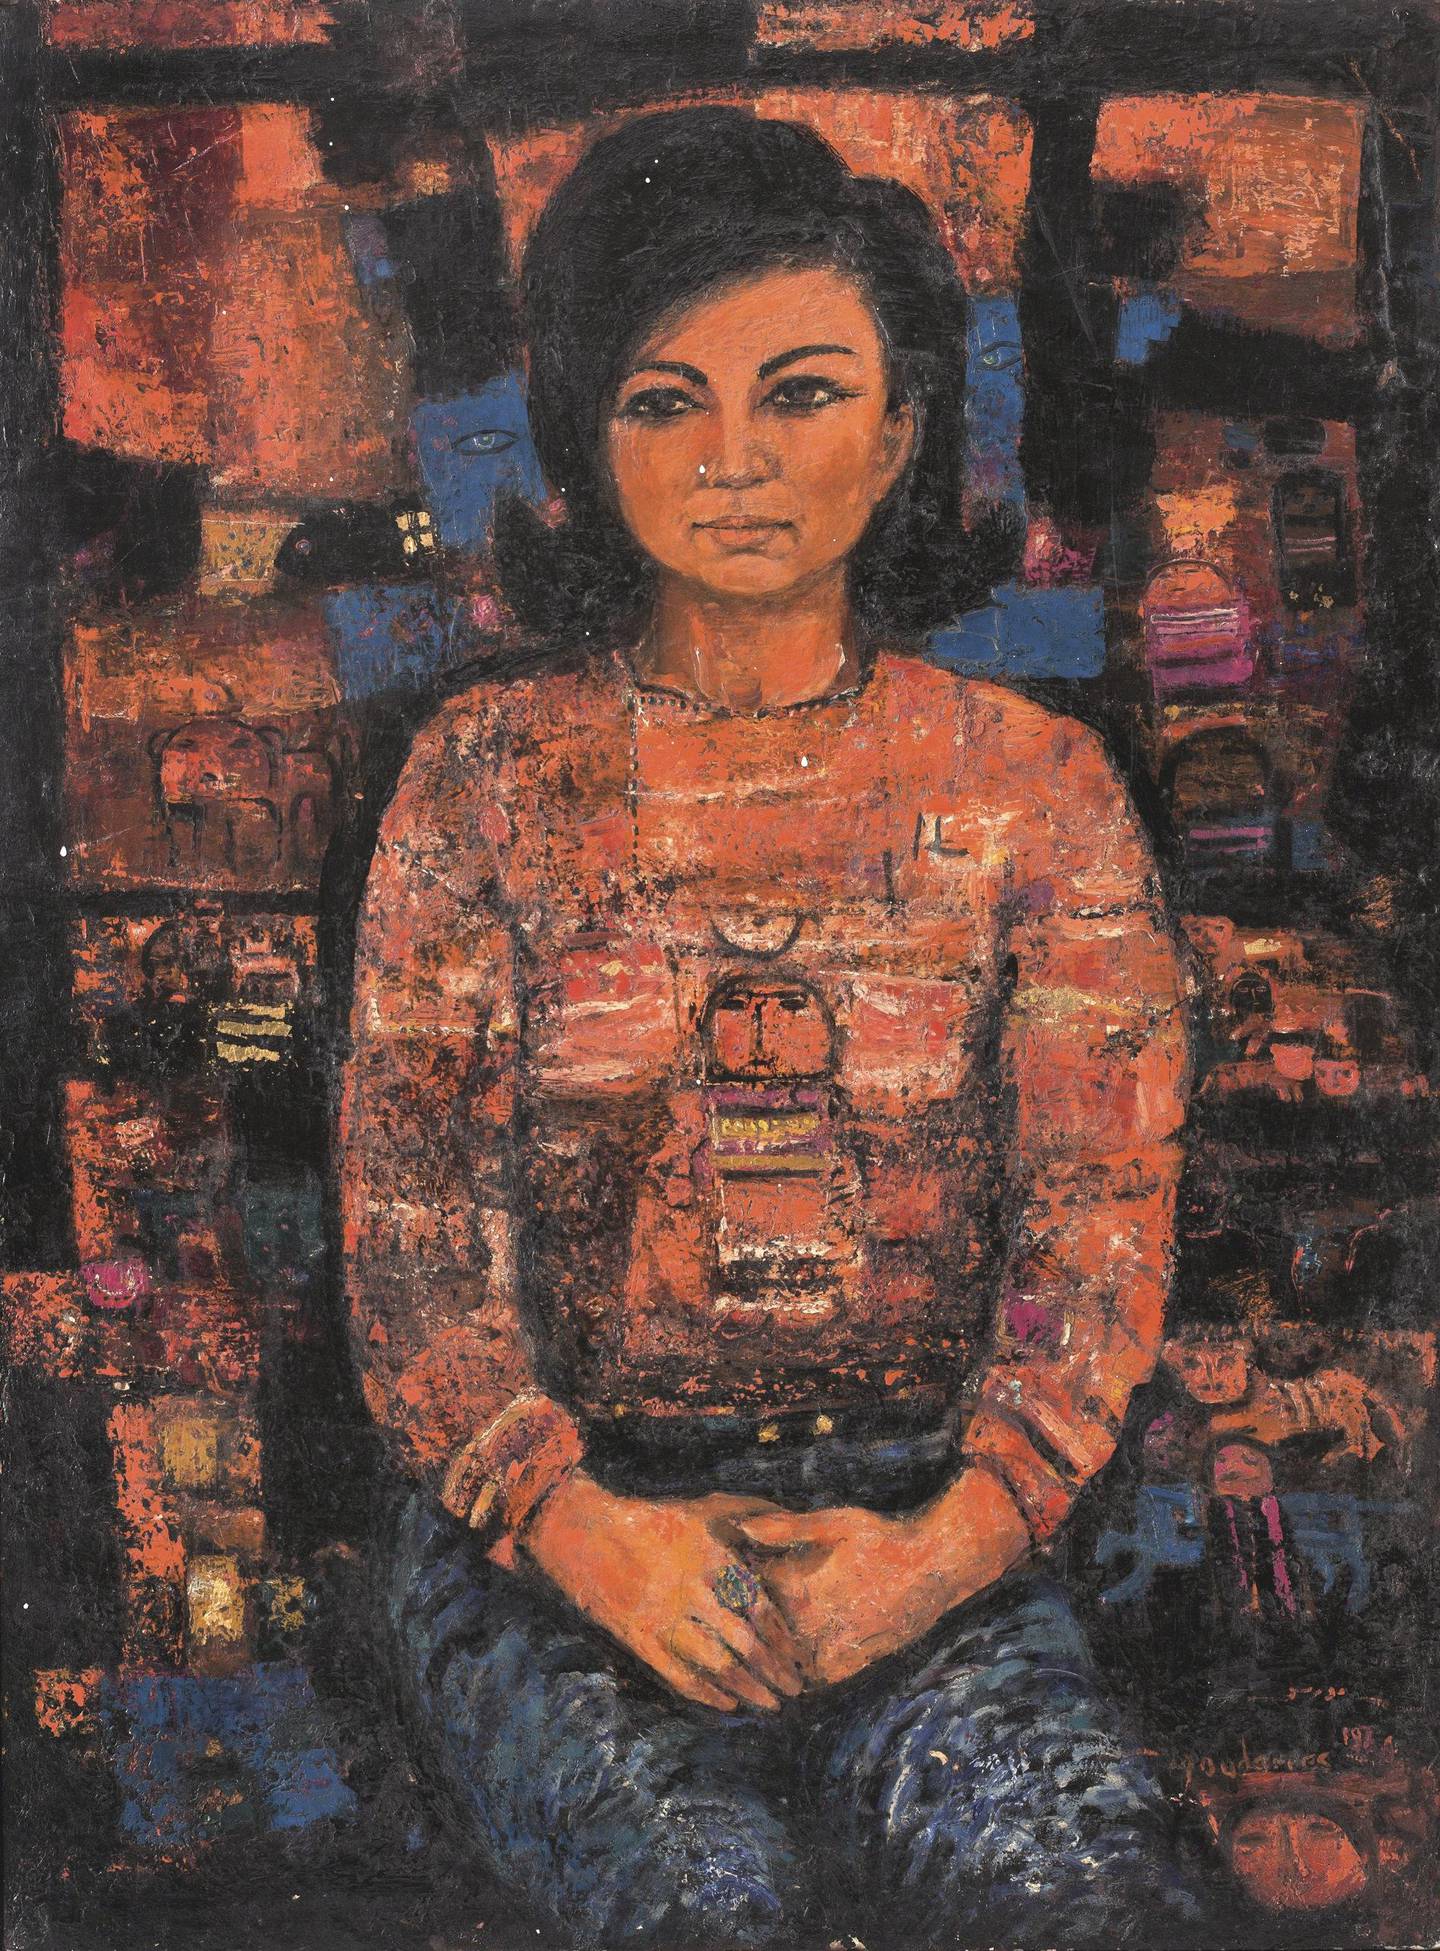 Untitled (Portrait of Amal Al-Ghazi), by Fateh Moudarres' (on the reverse), 1974. Christie's